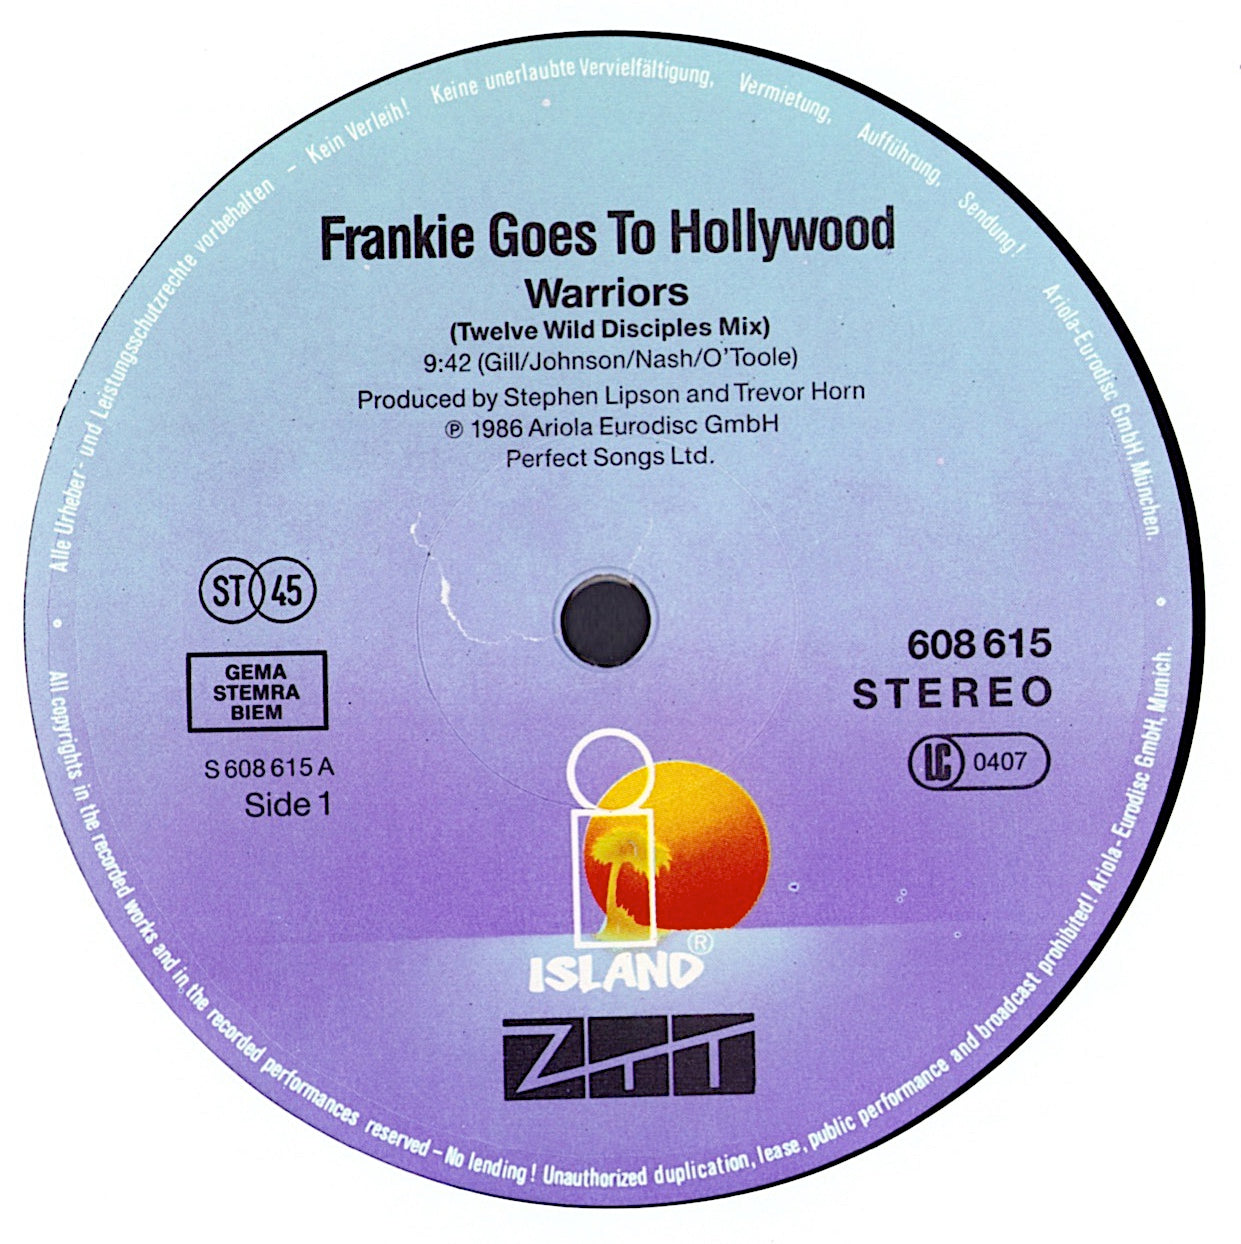 Frankie Goes To Hollywood - Warriors Twelve Wild Disciples Mix